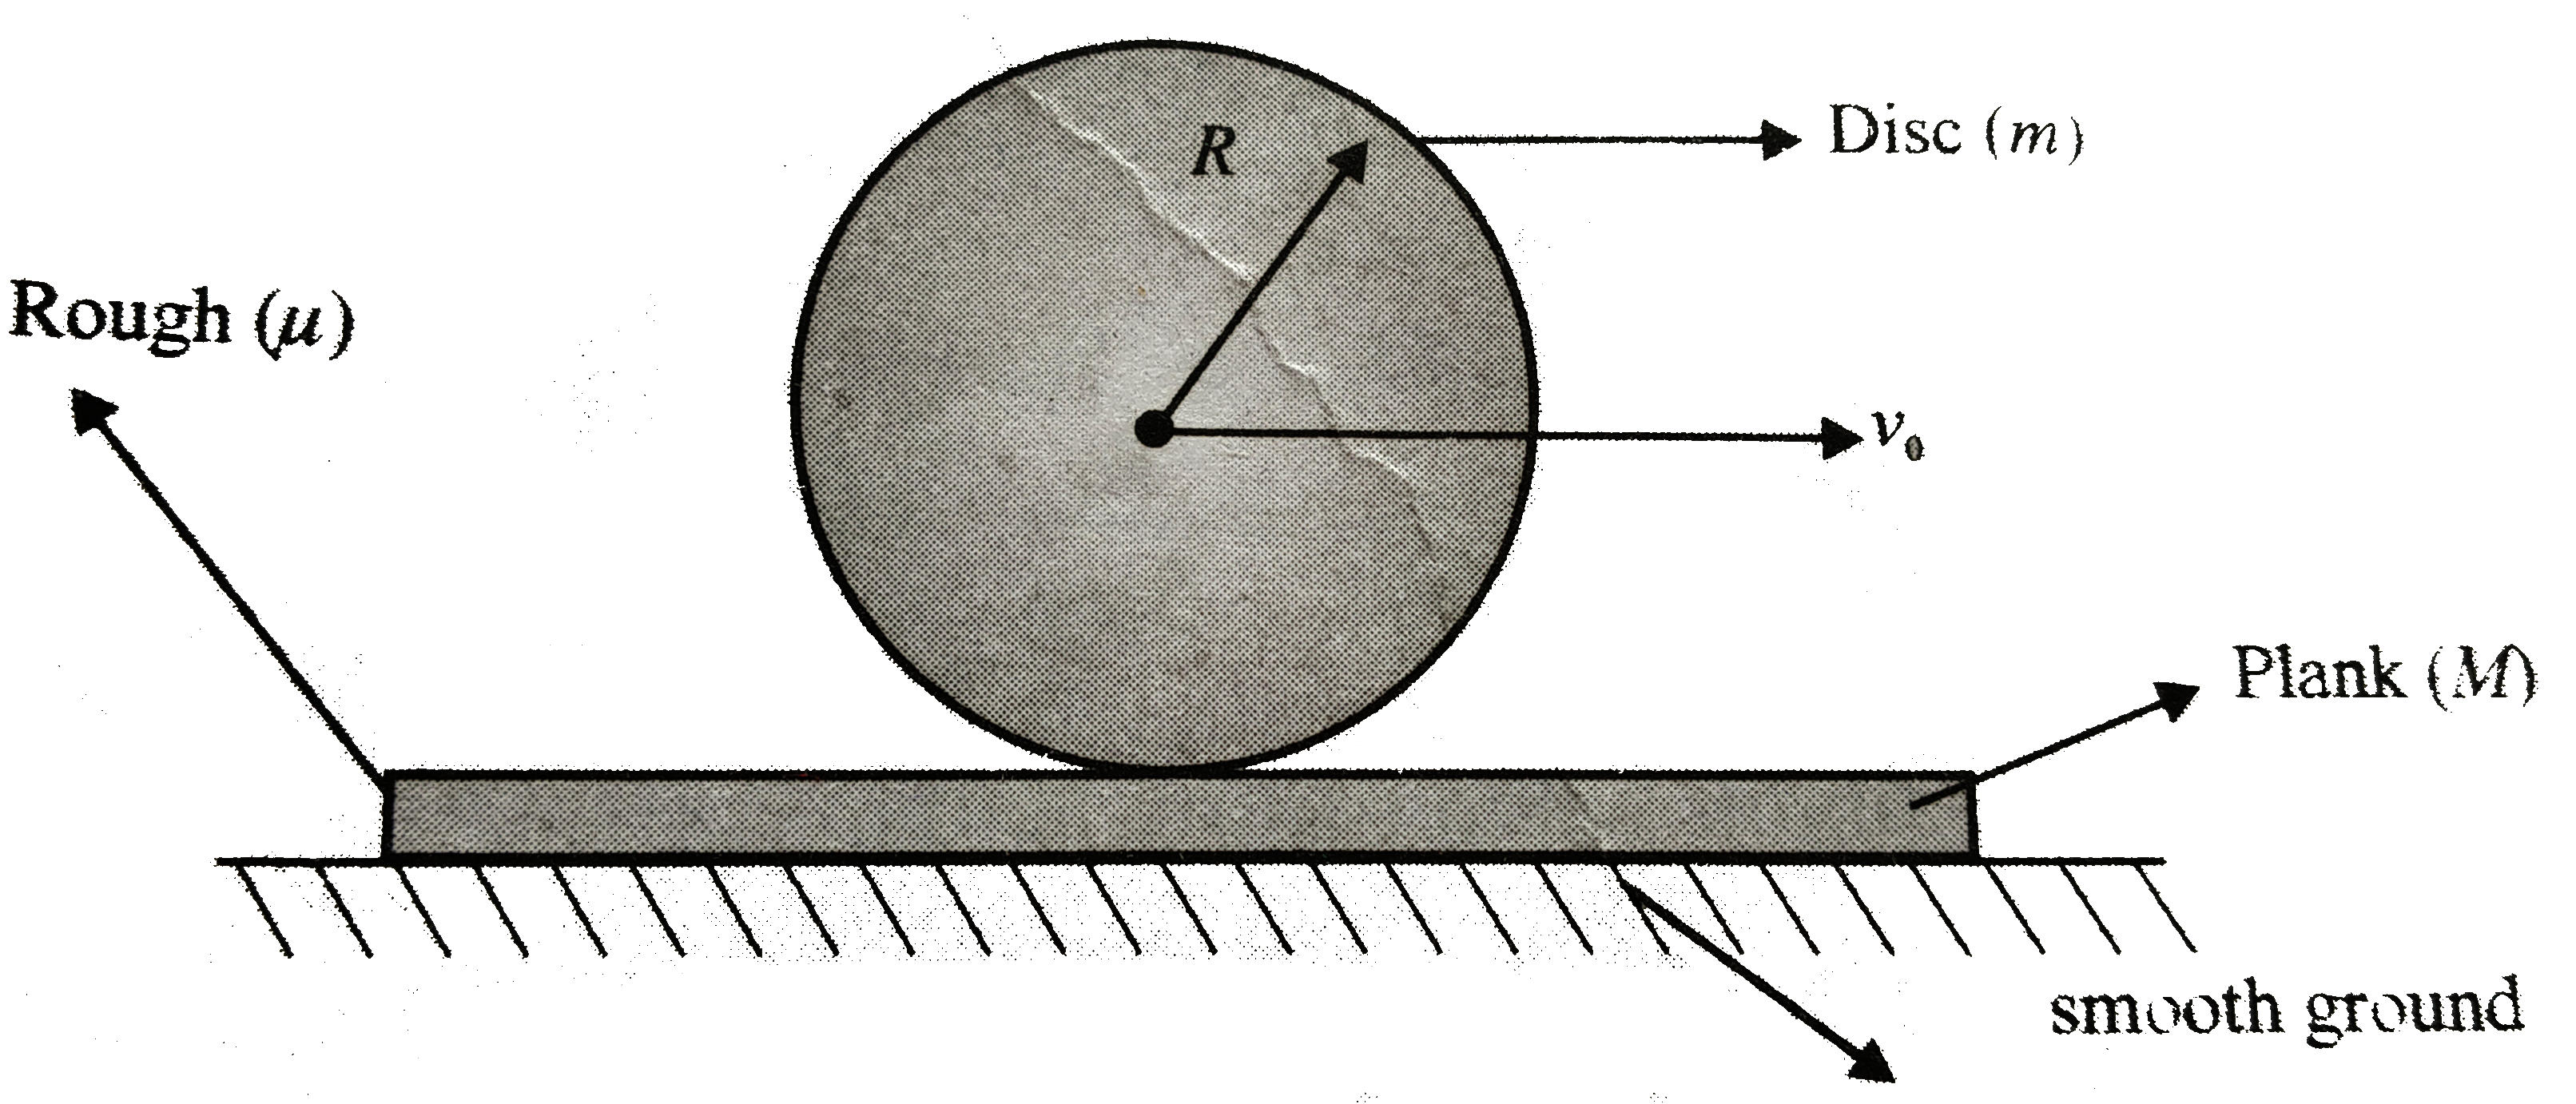 A plank of mass M, whose top surface is rough with coefficient of friction mu is placed on a smooth ground. Now a disc of mass m=M//2 and radius r is placed on the plank. The disc is now given a velocity v(0) in the horizontal direction at t=0      a. Find the time when the disc starts rolling   b. Find the velocity of the plank and the disc up to that time.   c. Find the distance travelled by the plank up to this instant.   Find the work done by the friction force up to this instant.